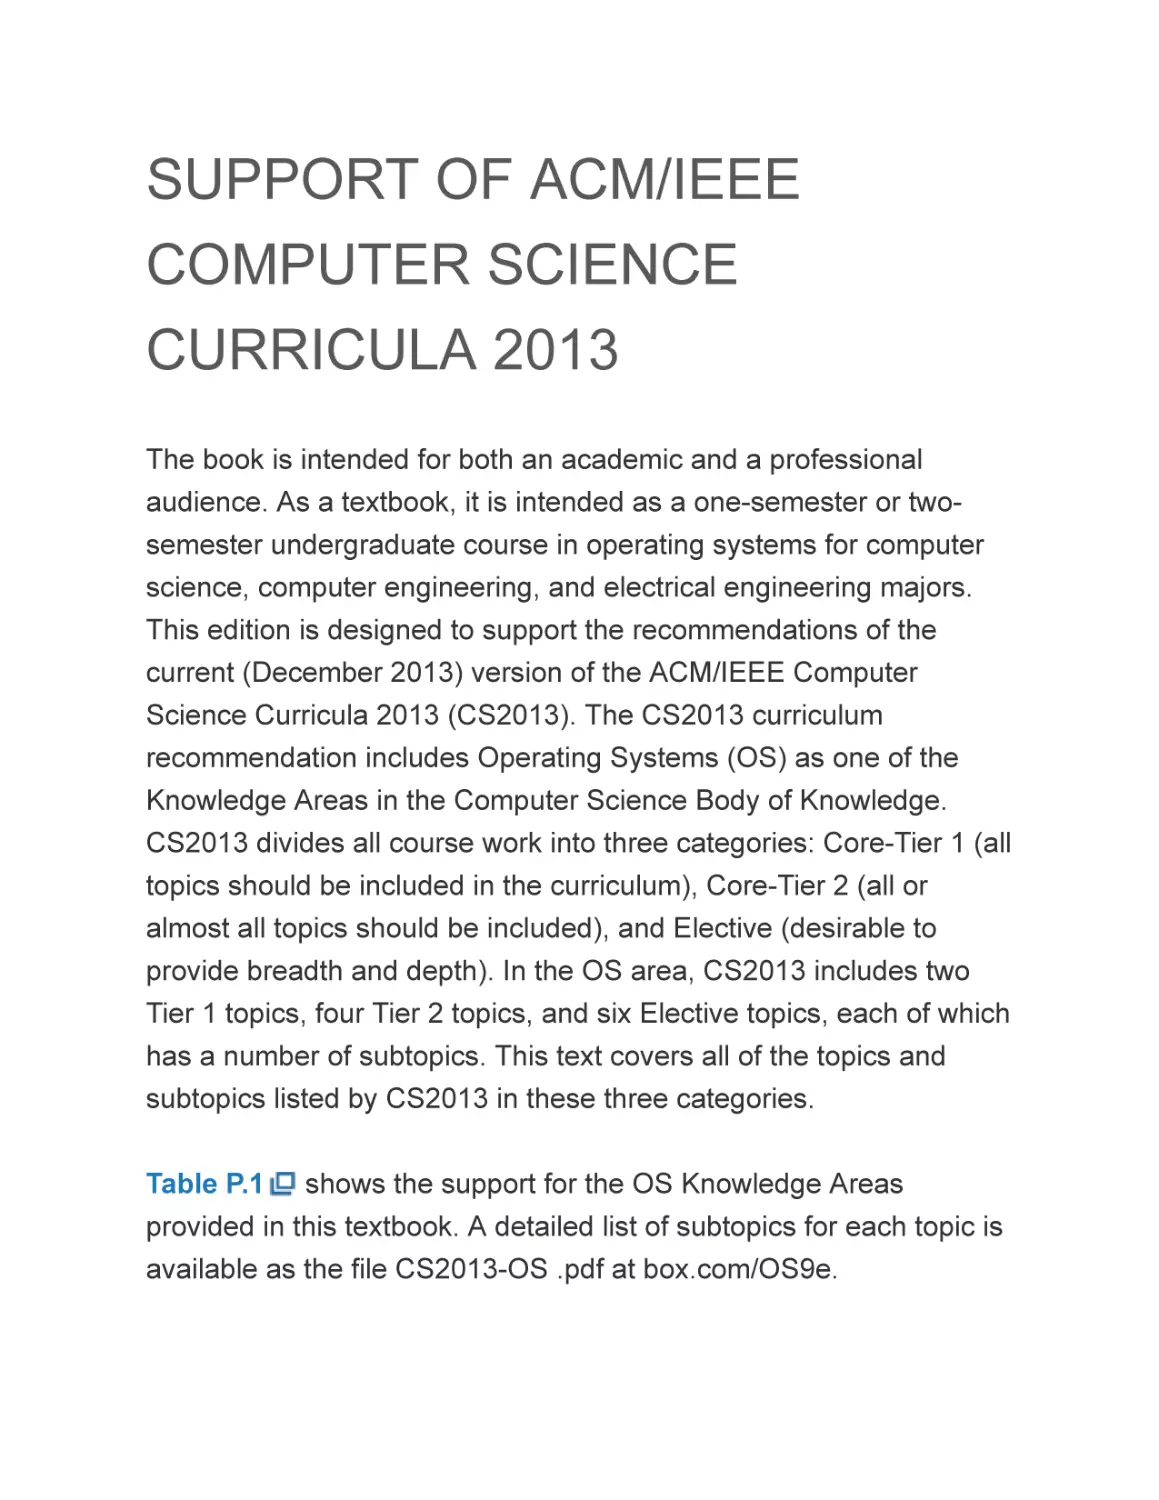 SUPPORT OF ACM/IEEE COMPUTER SCIENCE CURRICULA 2013